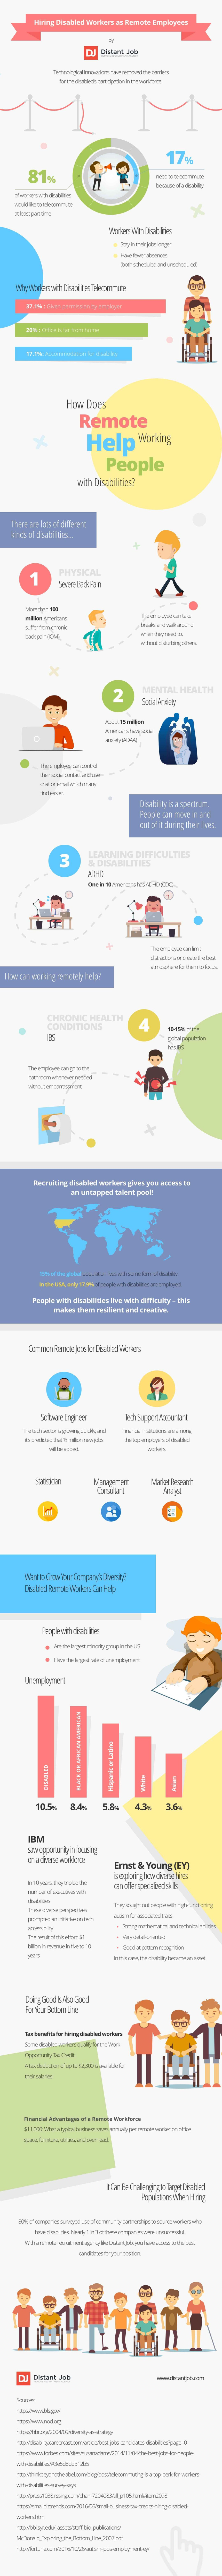 Hiring Disabled Workers as Remote Employees